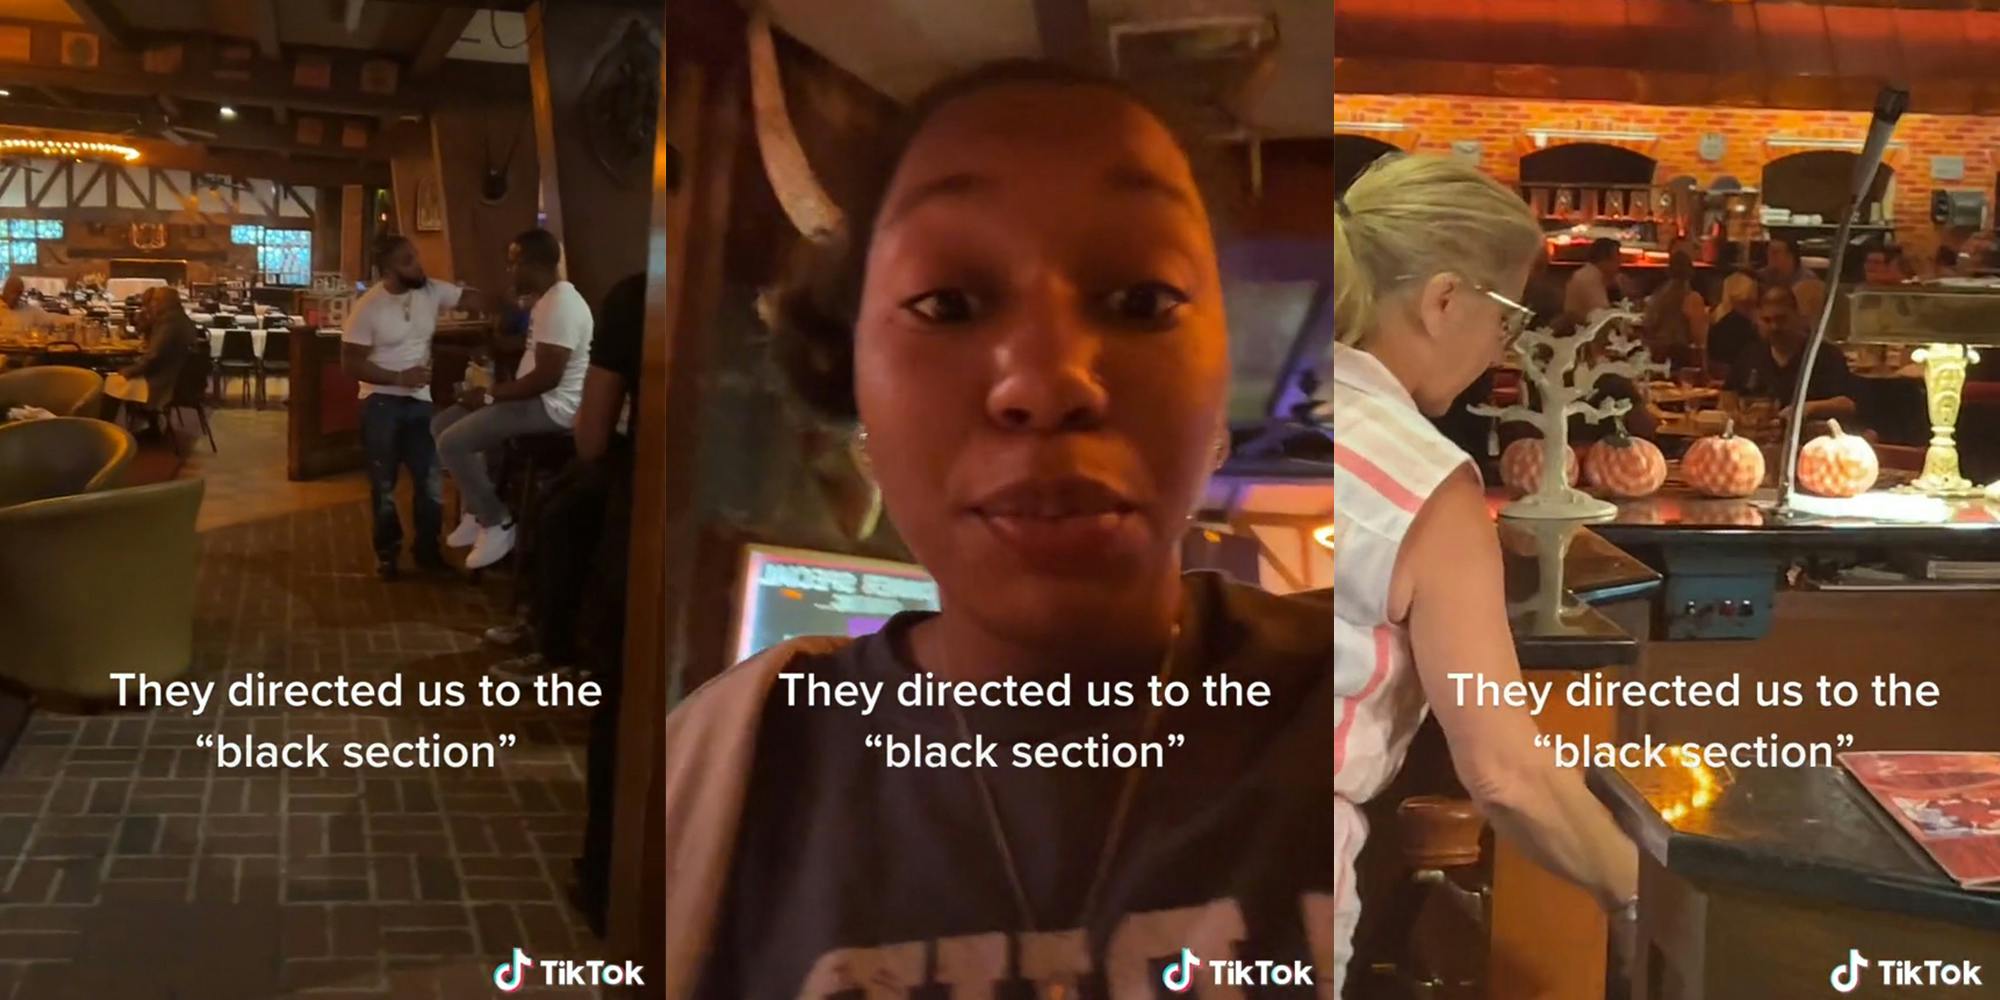 people in restaurant with caption "They directed us to the 'black section'"